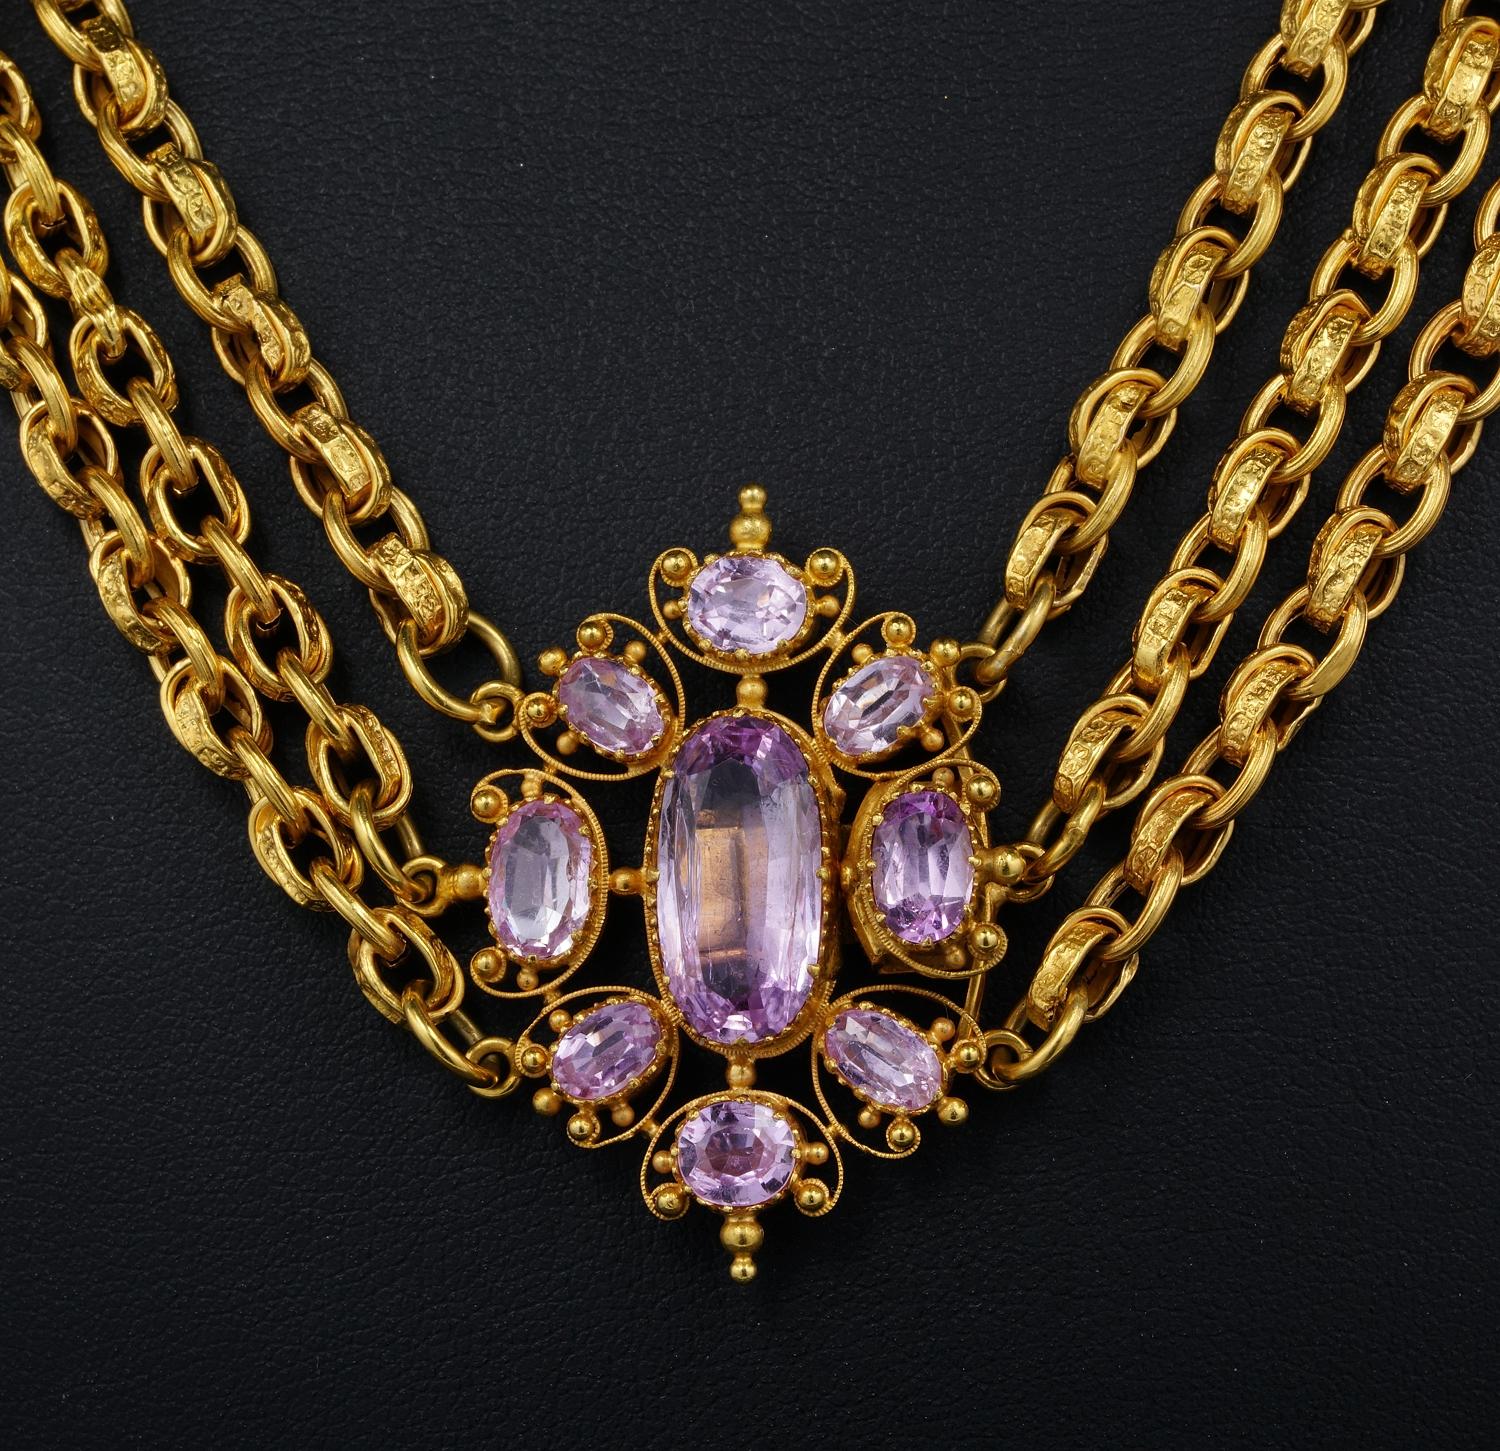 A Georgian magnificent multi-chain and Pink Topaz cannetille work necklace, 1800 ca
Solid 18KT – rich gold colour multi chains lead to the main center of cannetille work close back set  natural Pink Topaz arranged in flower like cluster and finely